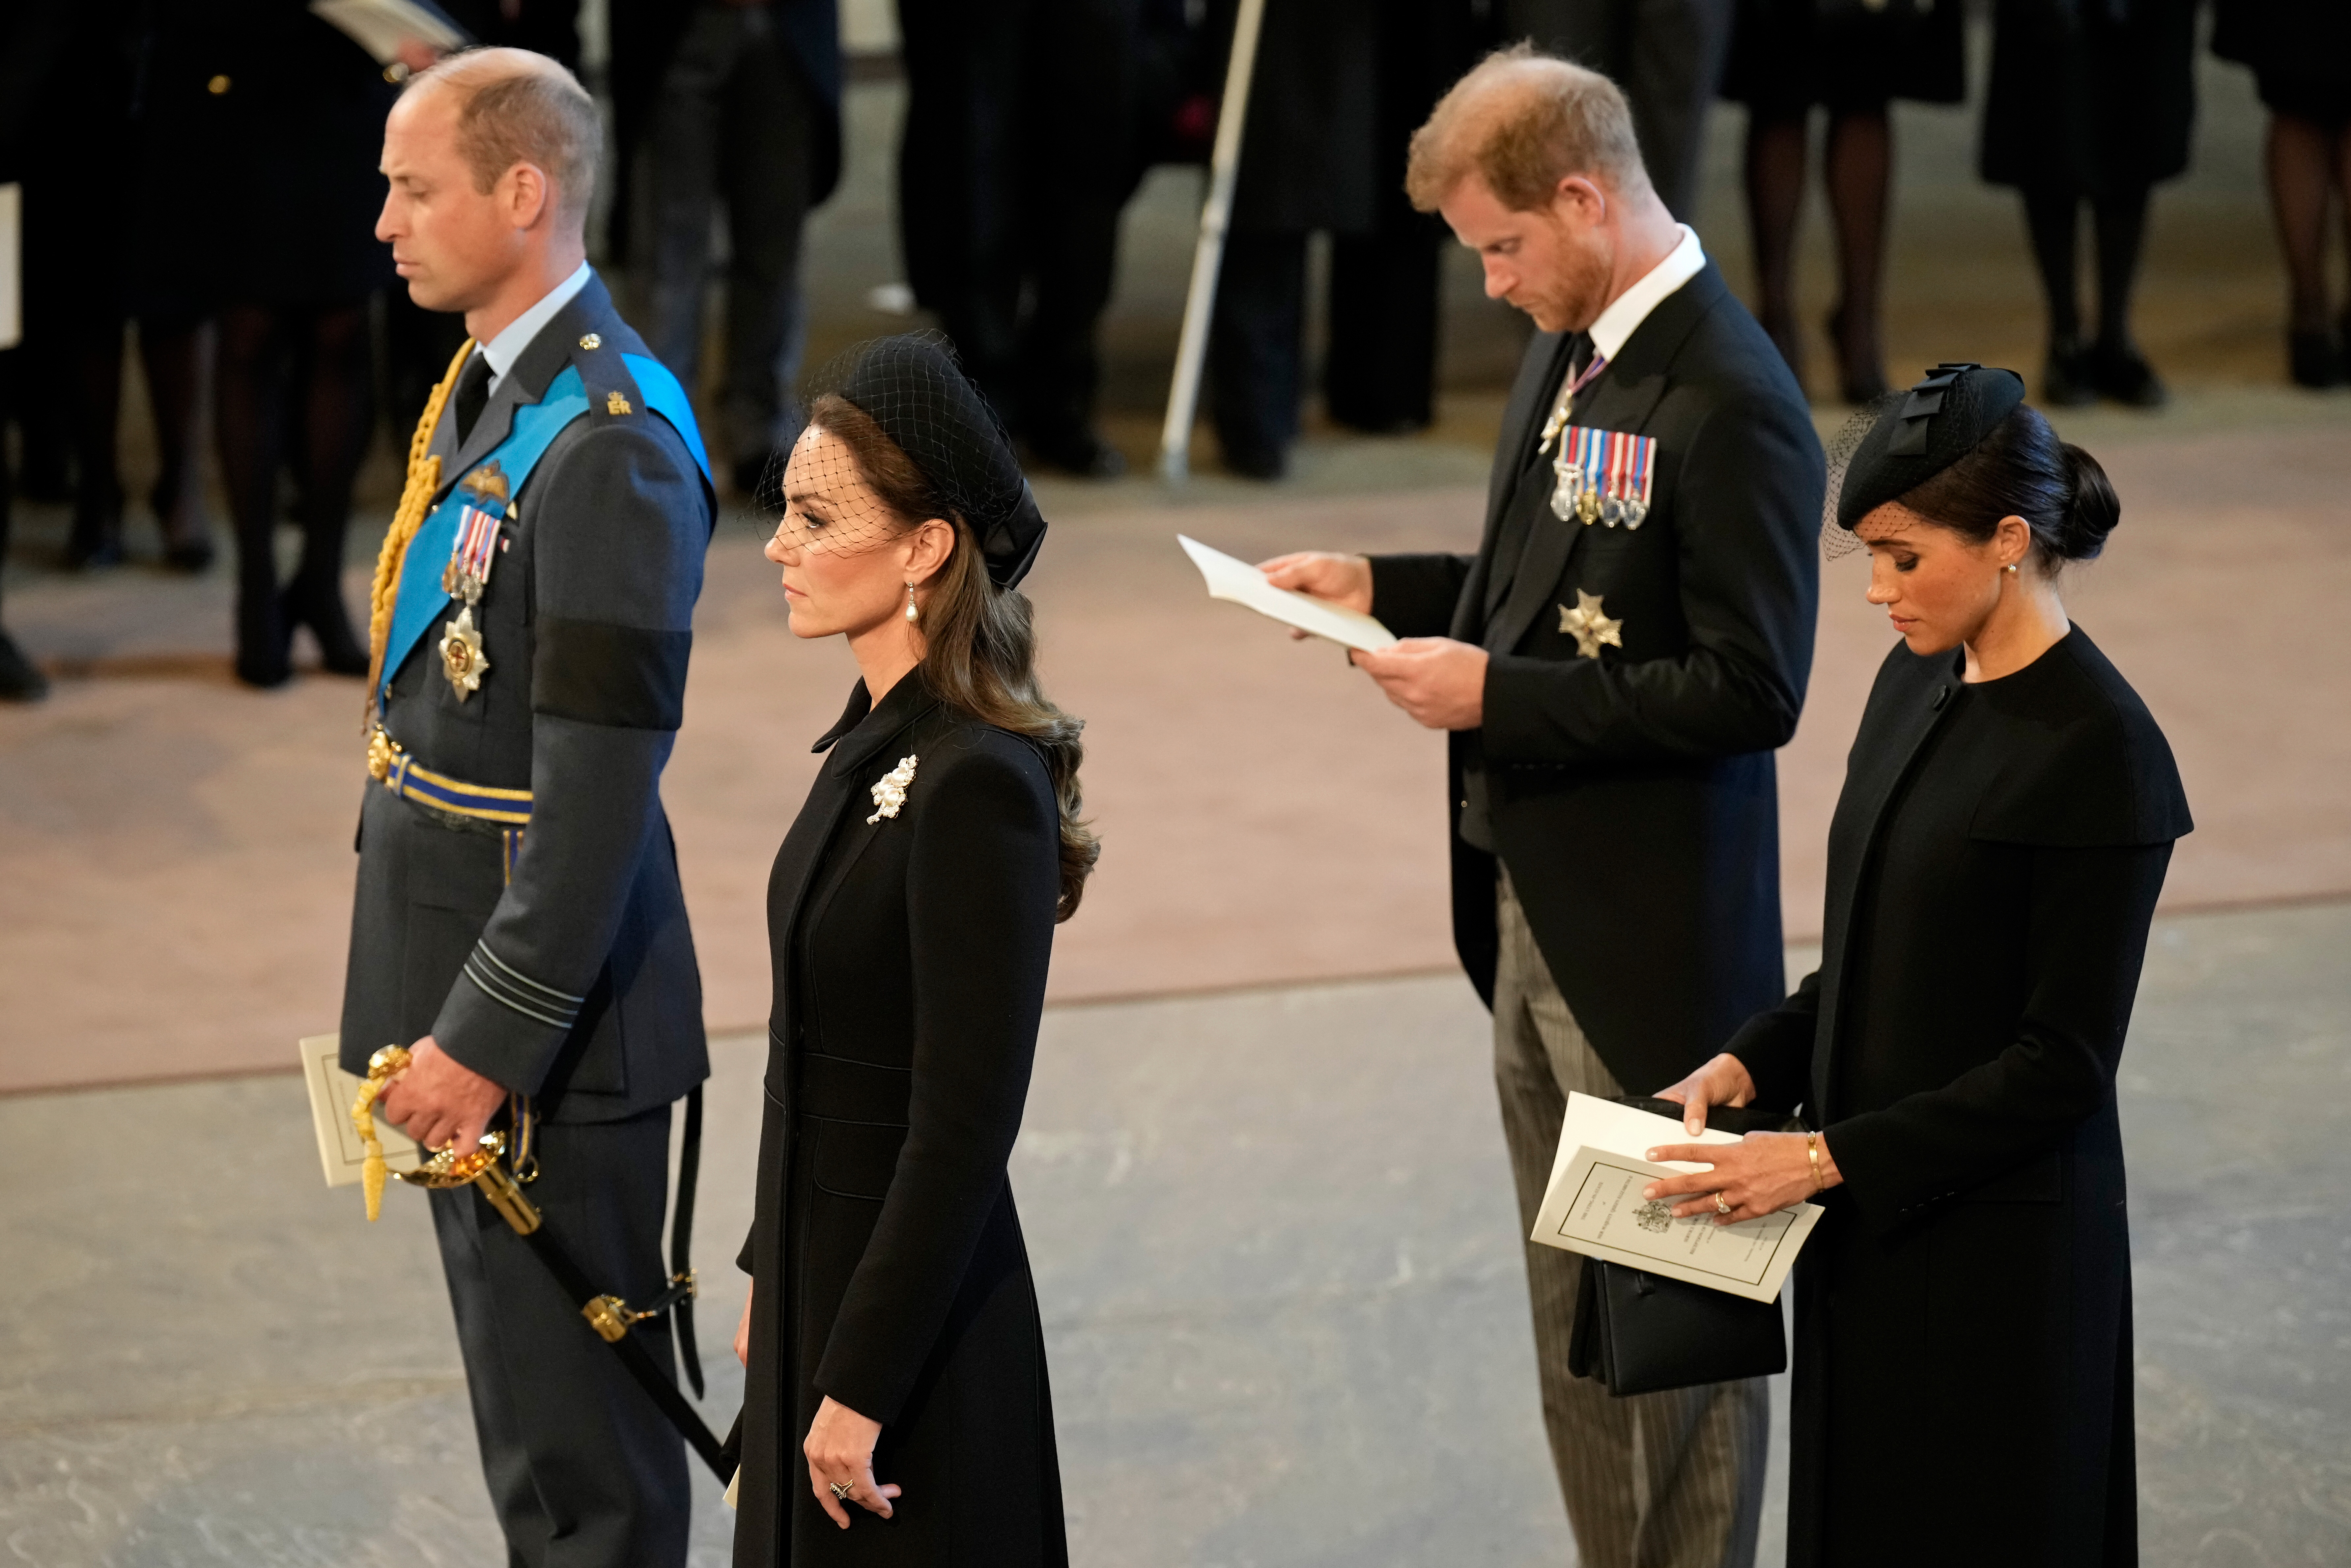 Prince William, Princess Catherine, Meghan Markle, and Prince Harry at the Lying-in State of Queen Elizabeth II on September 14, 2022 in London, England | Source: Getty Images